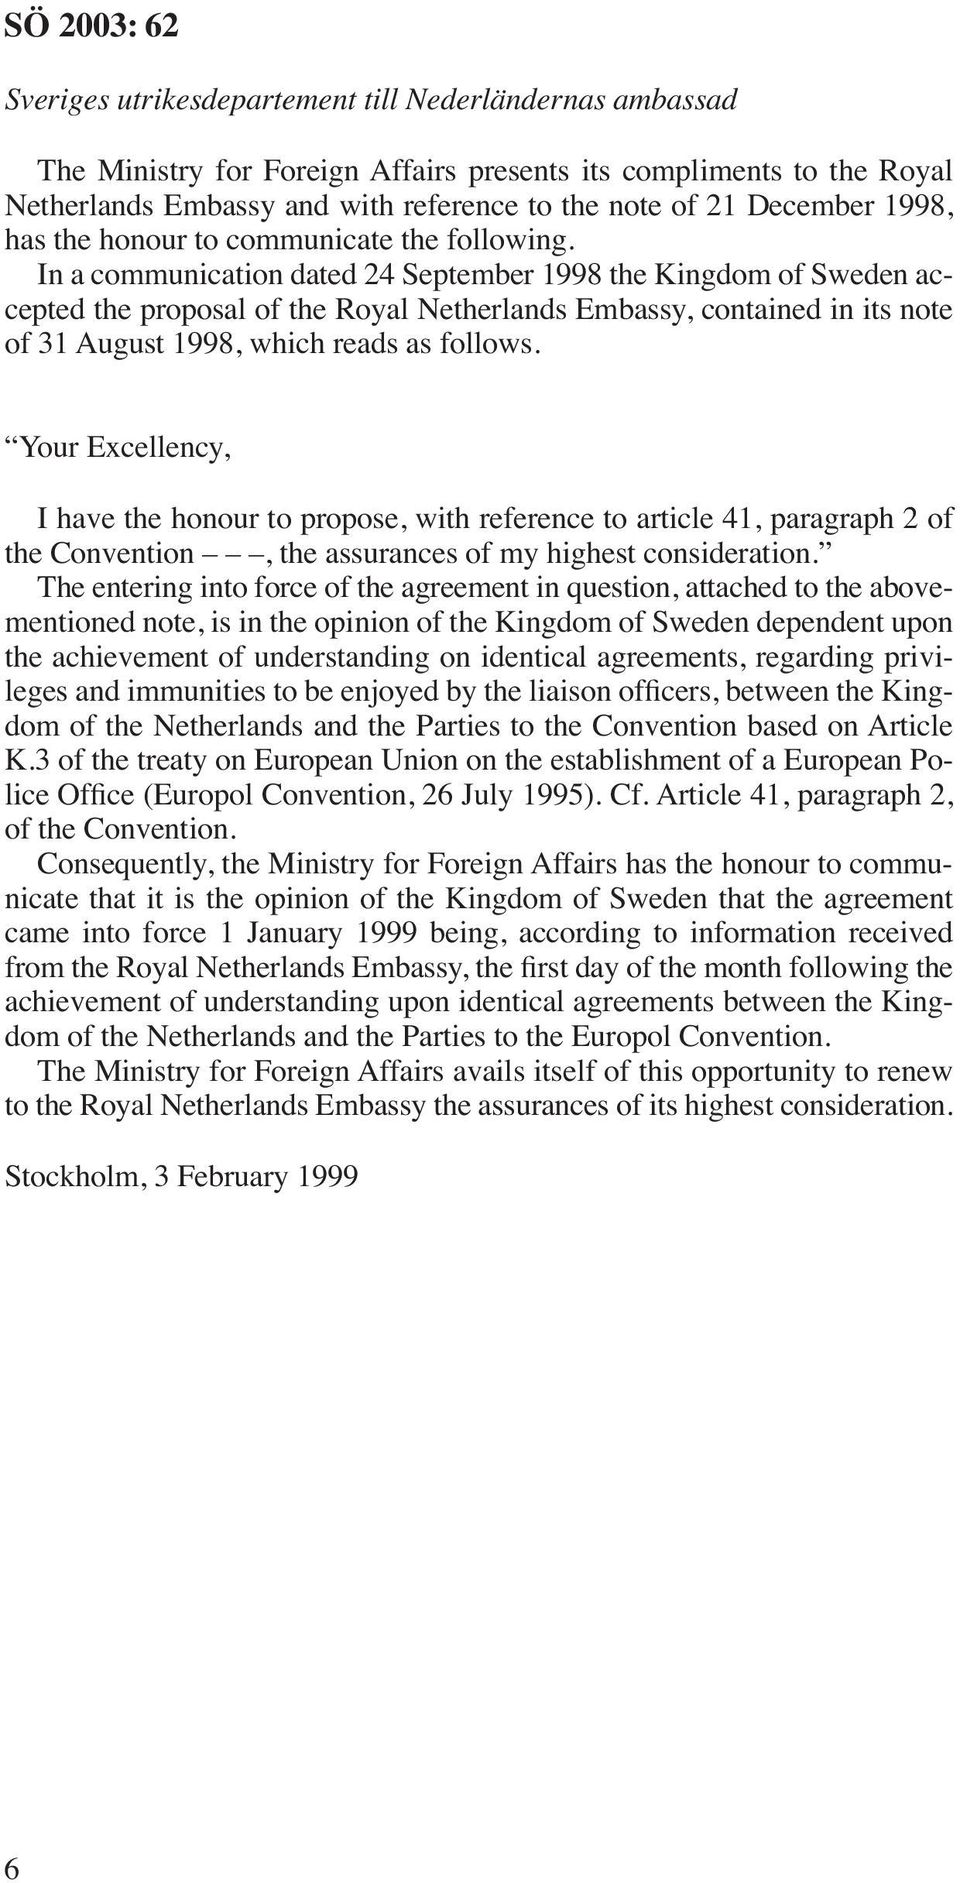 In a communication dated 24 September 1998 the Kingdom of Sweden accepted the proposal of the Royal Netherlands Embassy, contained in its note of 31 August 1998, which reads as follows.